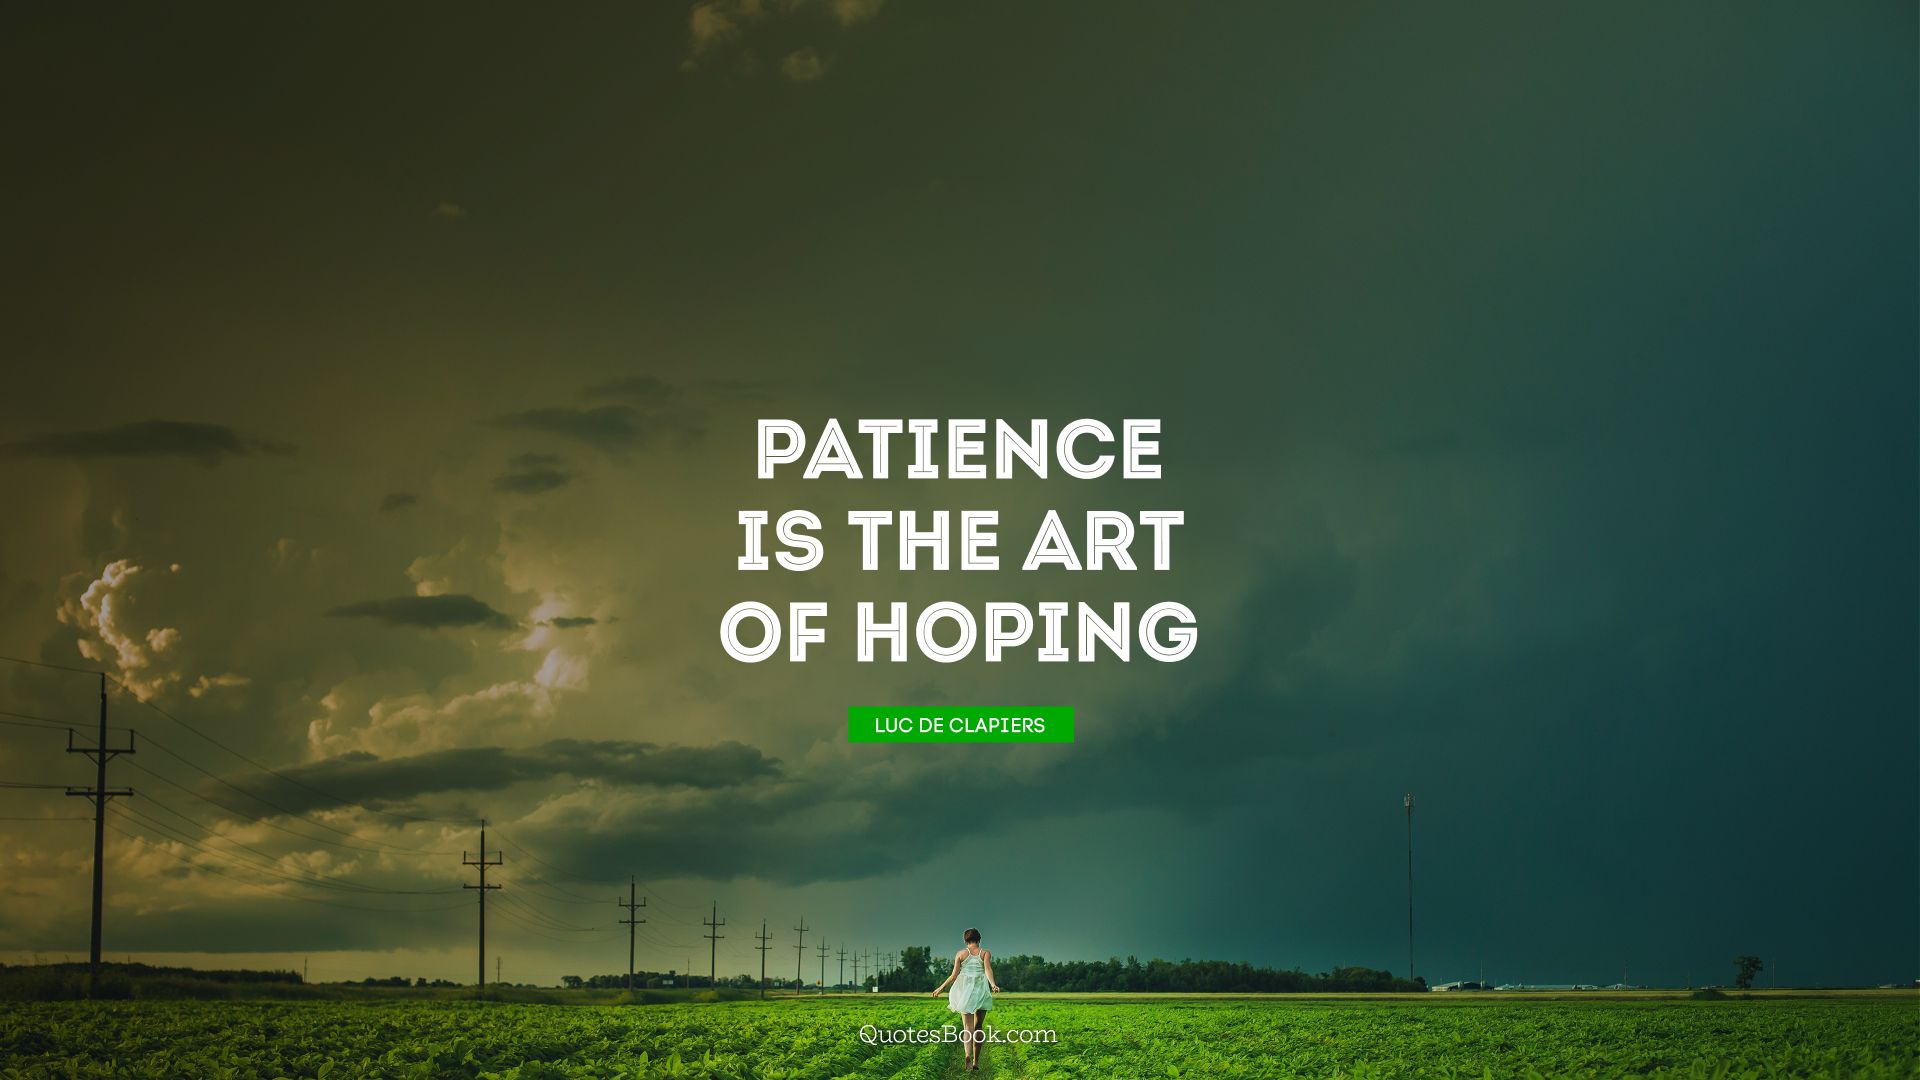 Patience is the art of hoping. - Quote by Luc de Clapiers